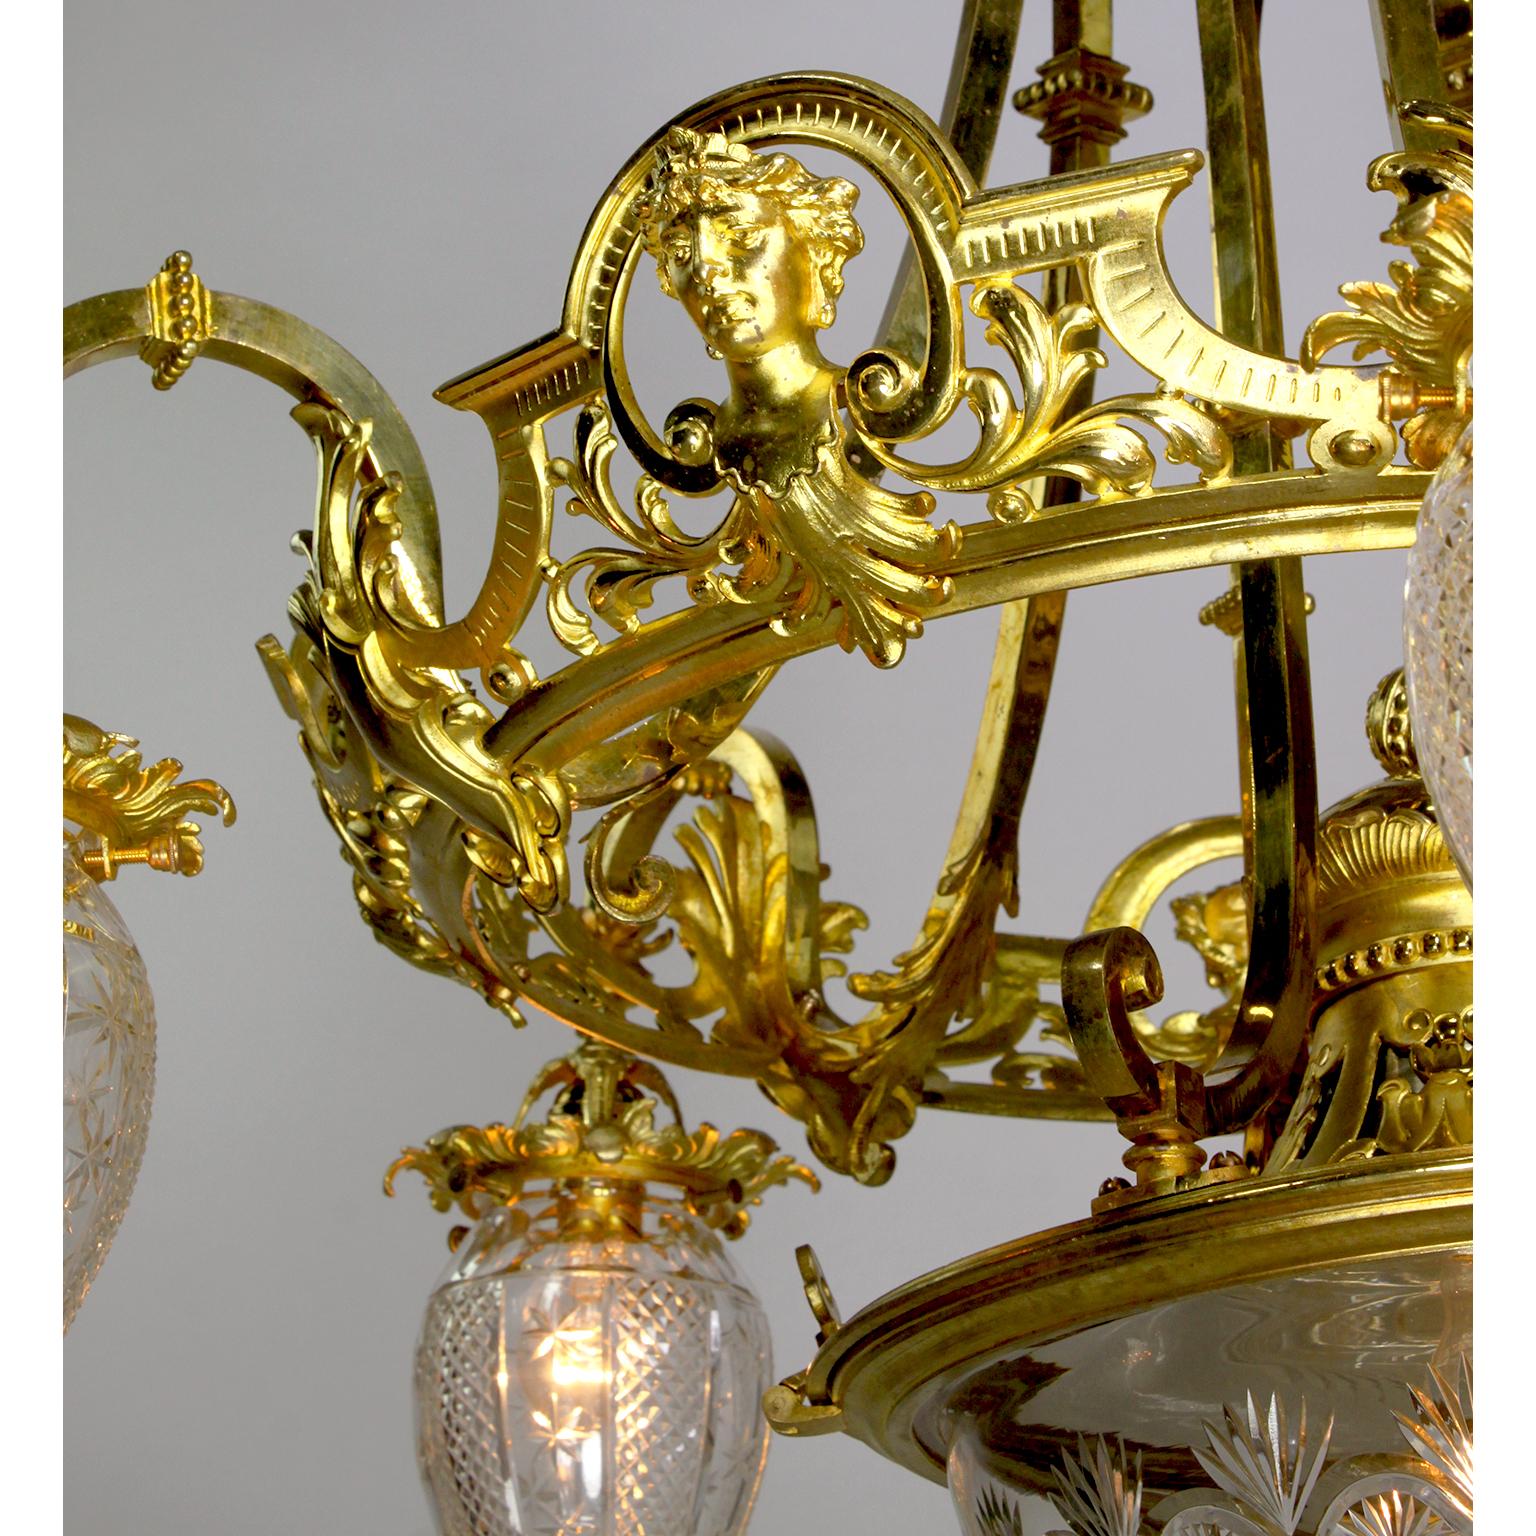 Early 20th Century French 19th-20th Century Belle Époque Gilt-Bronze & Cut-Glass 6-Light Chandelier For Sale